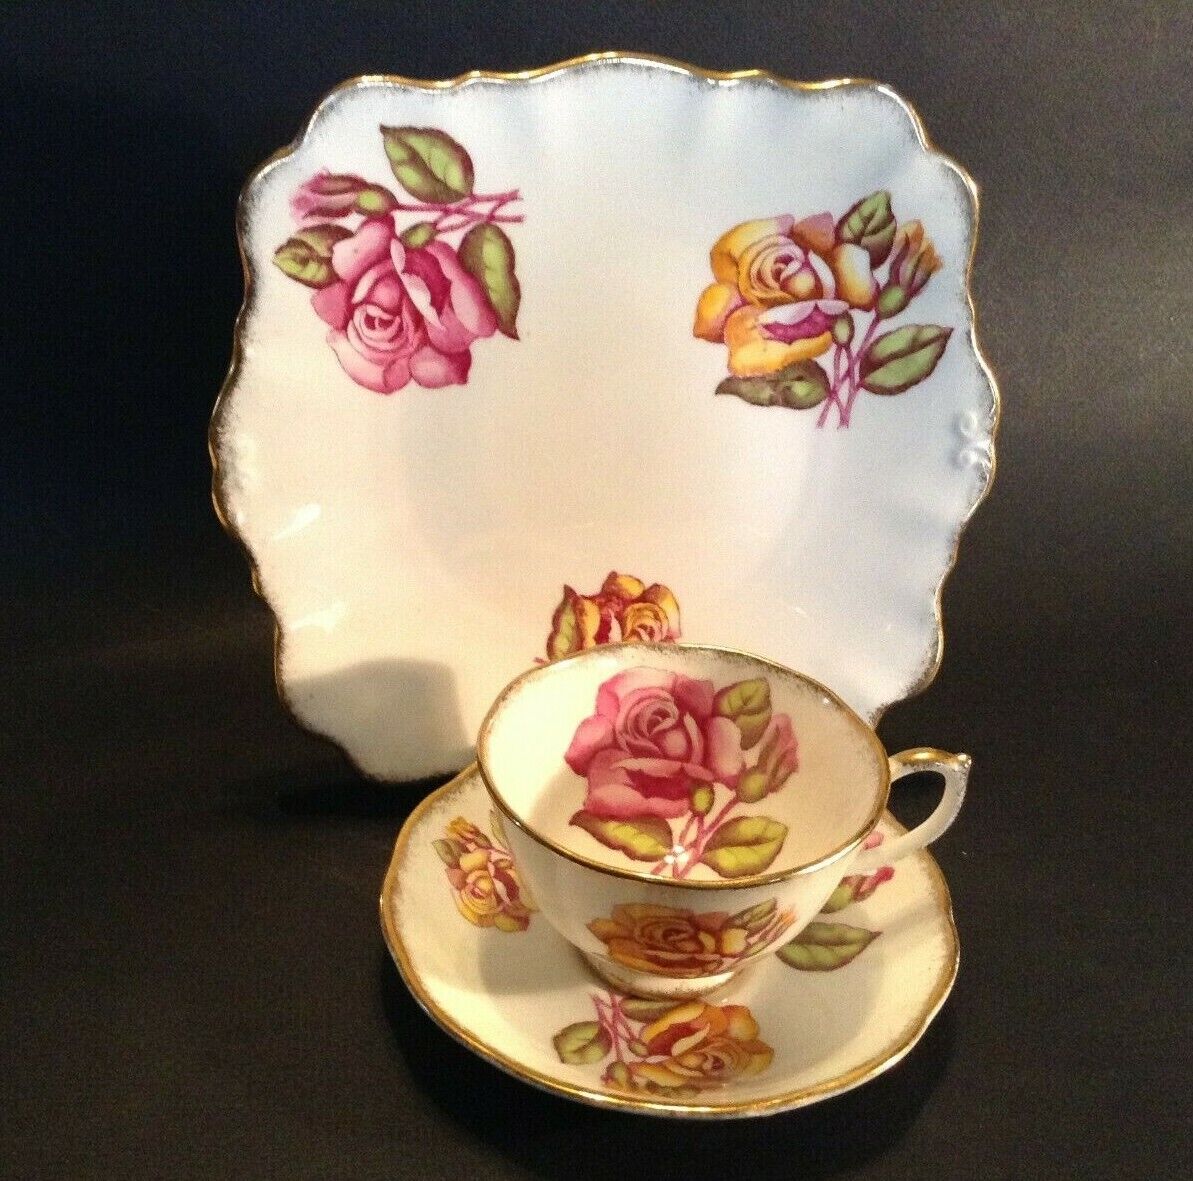 Roslyn Cup Saucer & Square Handled Dessert Plate - Pink & Yellow Roses - England